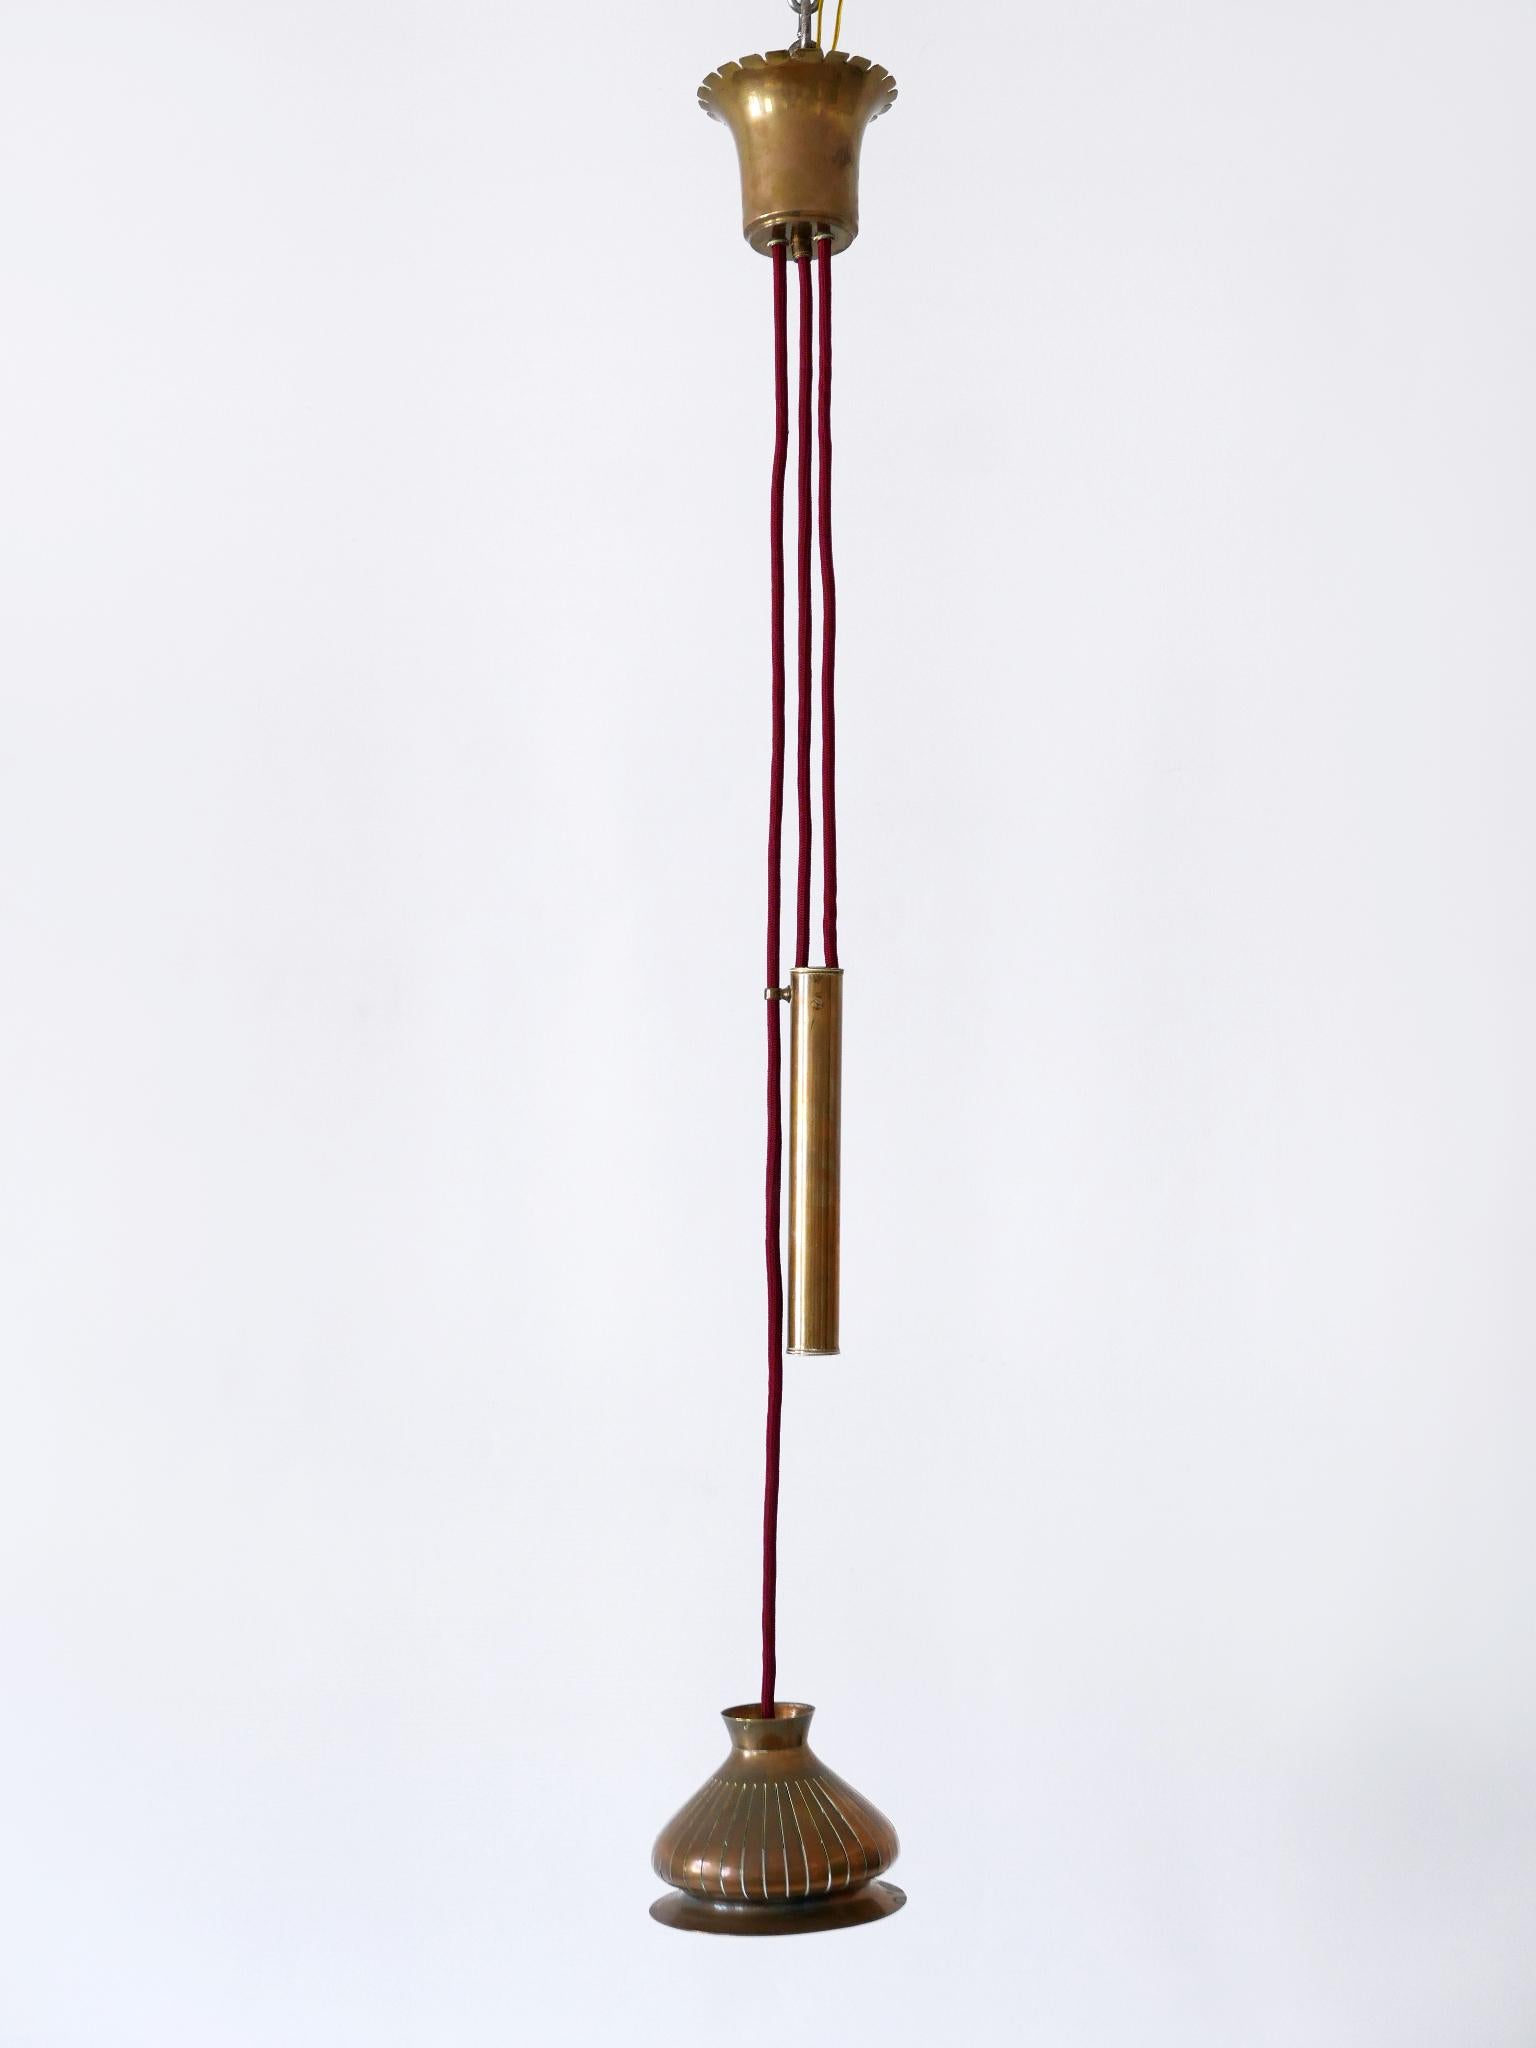 Extremely Rare Mid Century Modern Counterweight Brass Pendant Lamp Germany 1950s For Sale 5